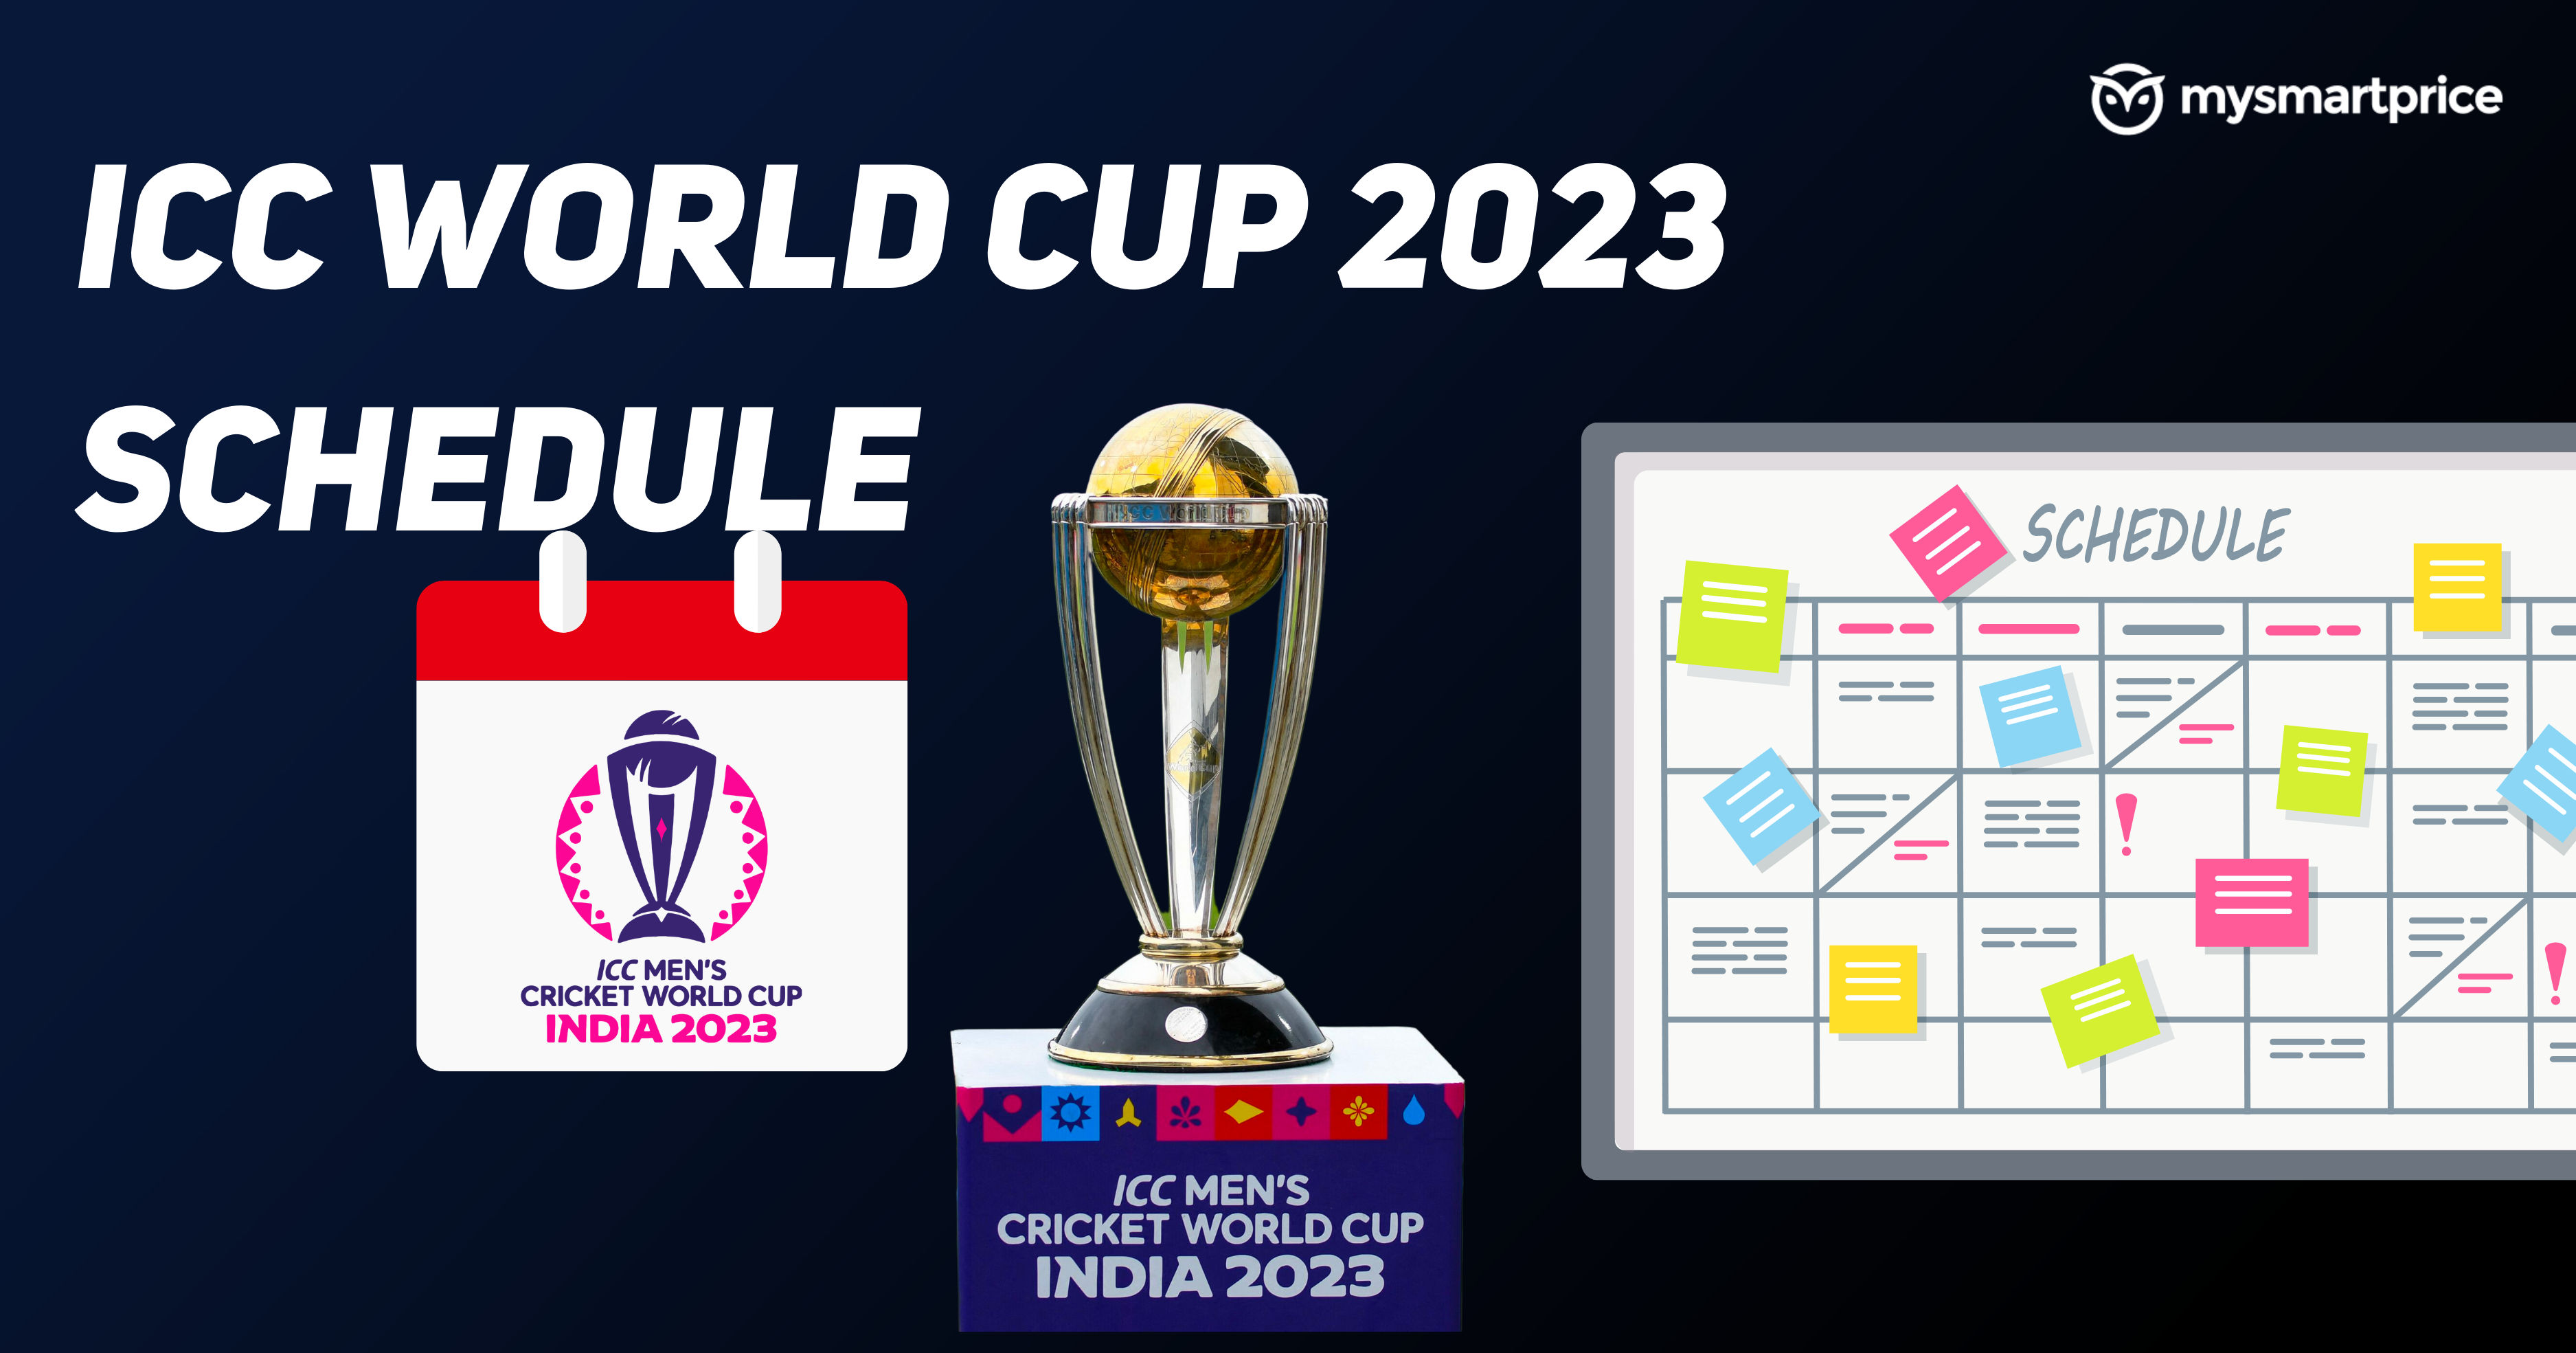 ICC Mens World Cup 2023 Schedule Full List of Matches, Start Date, Timings, Venues and More